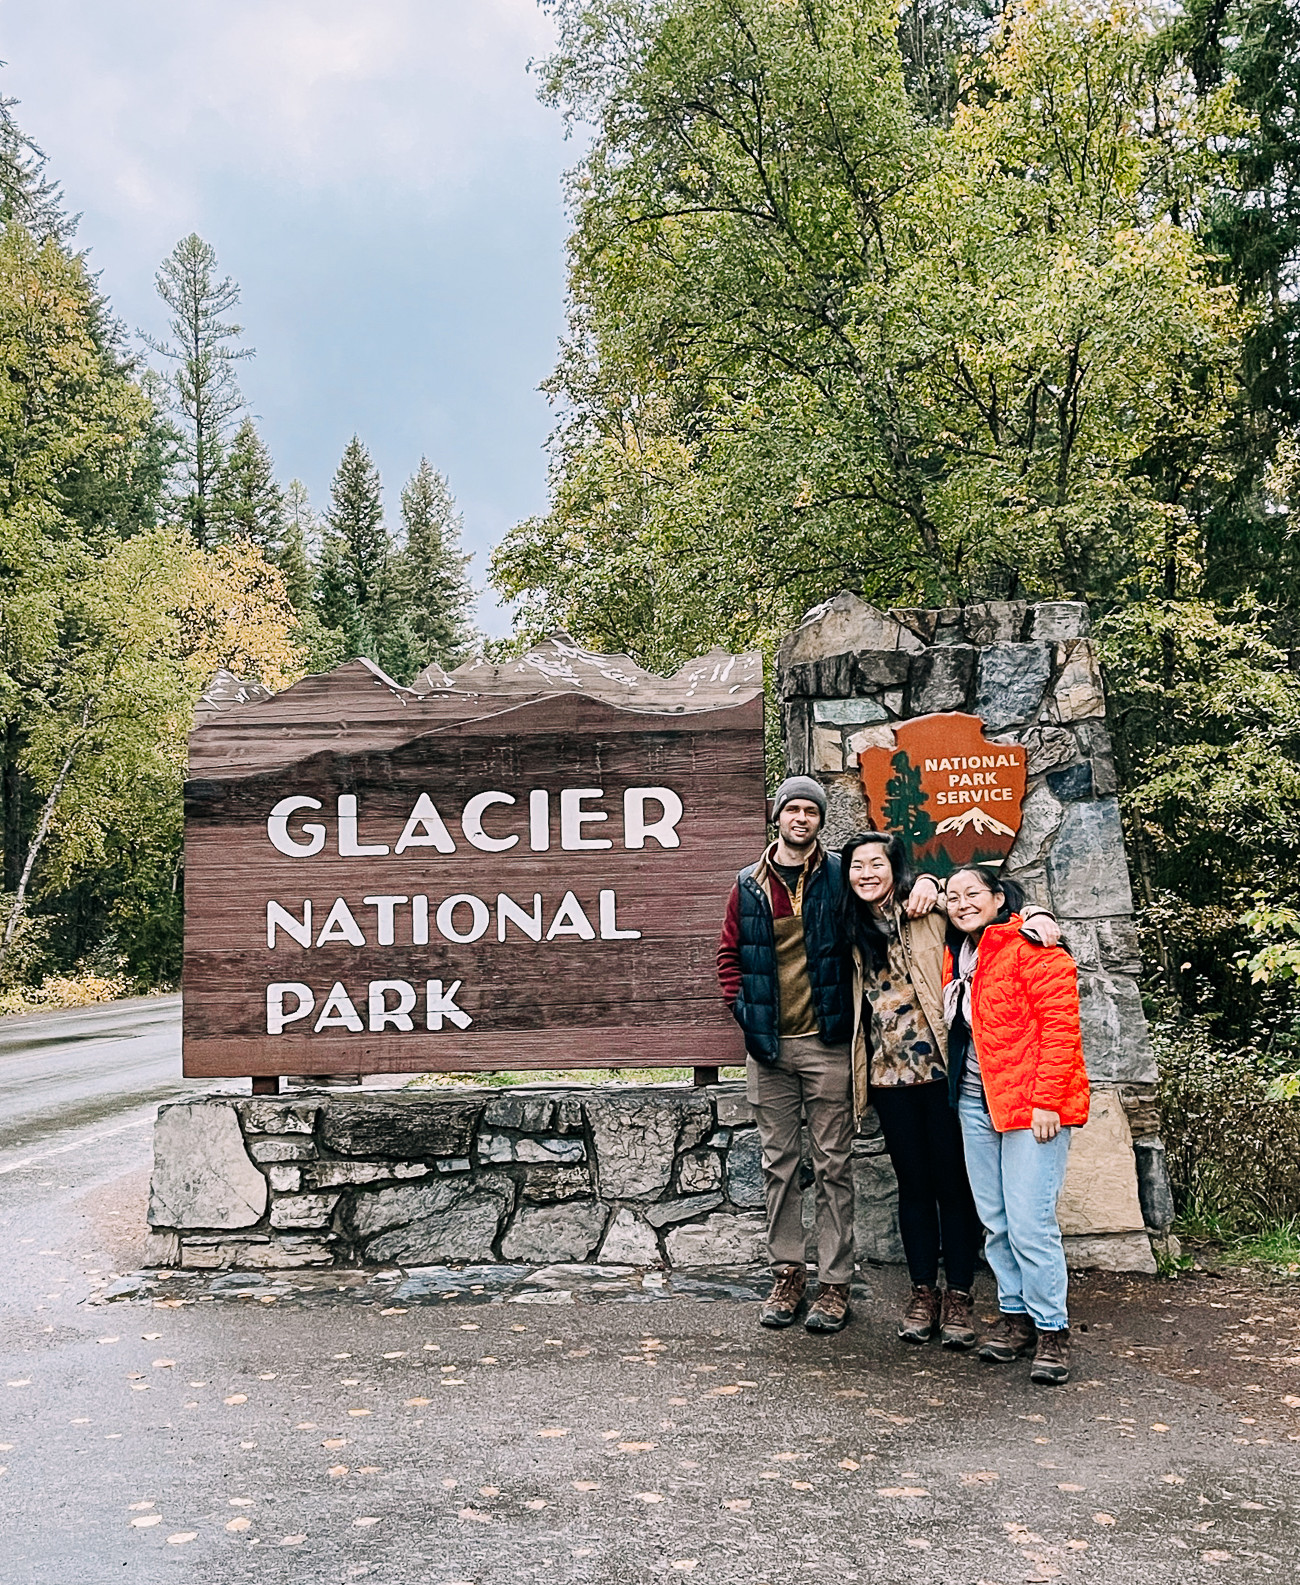 Sarah, Kaitlin, and Justin posing in front of Glacier National Park sign